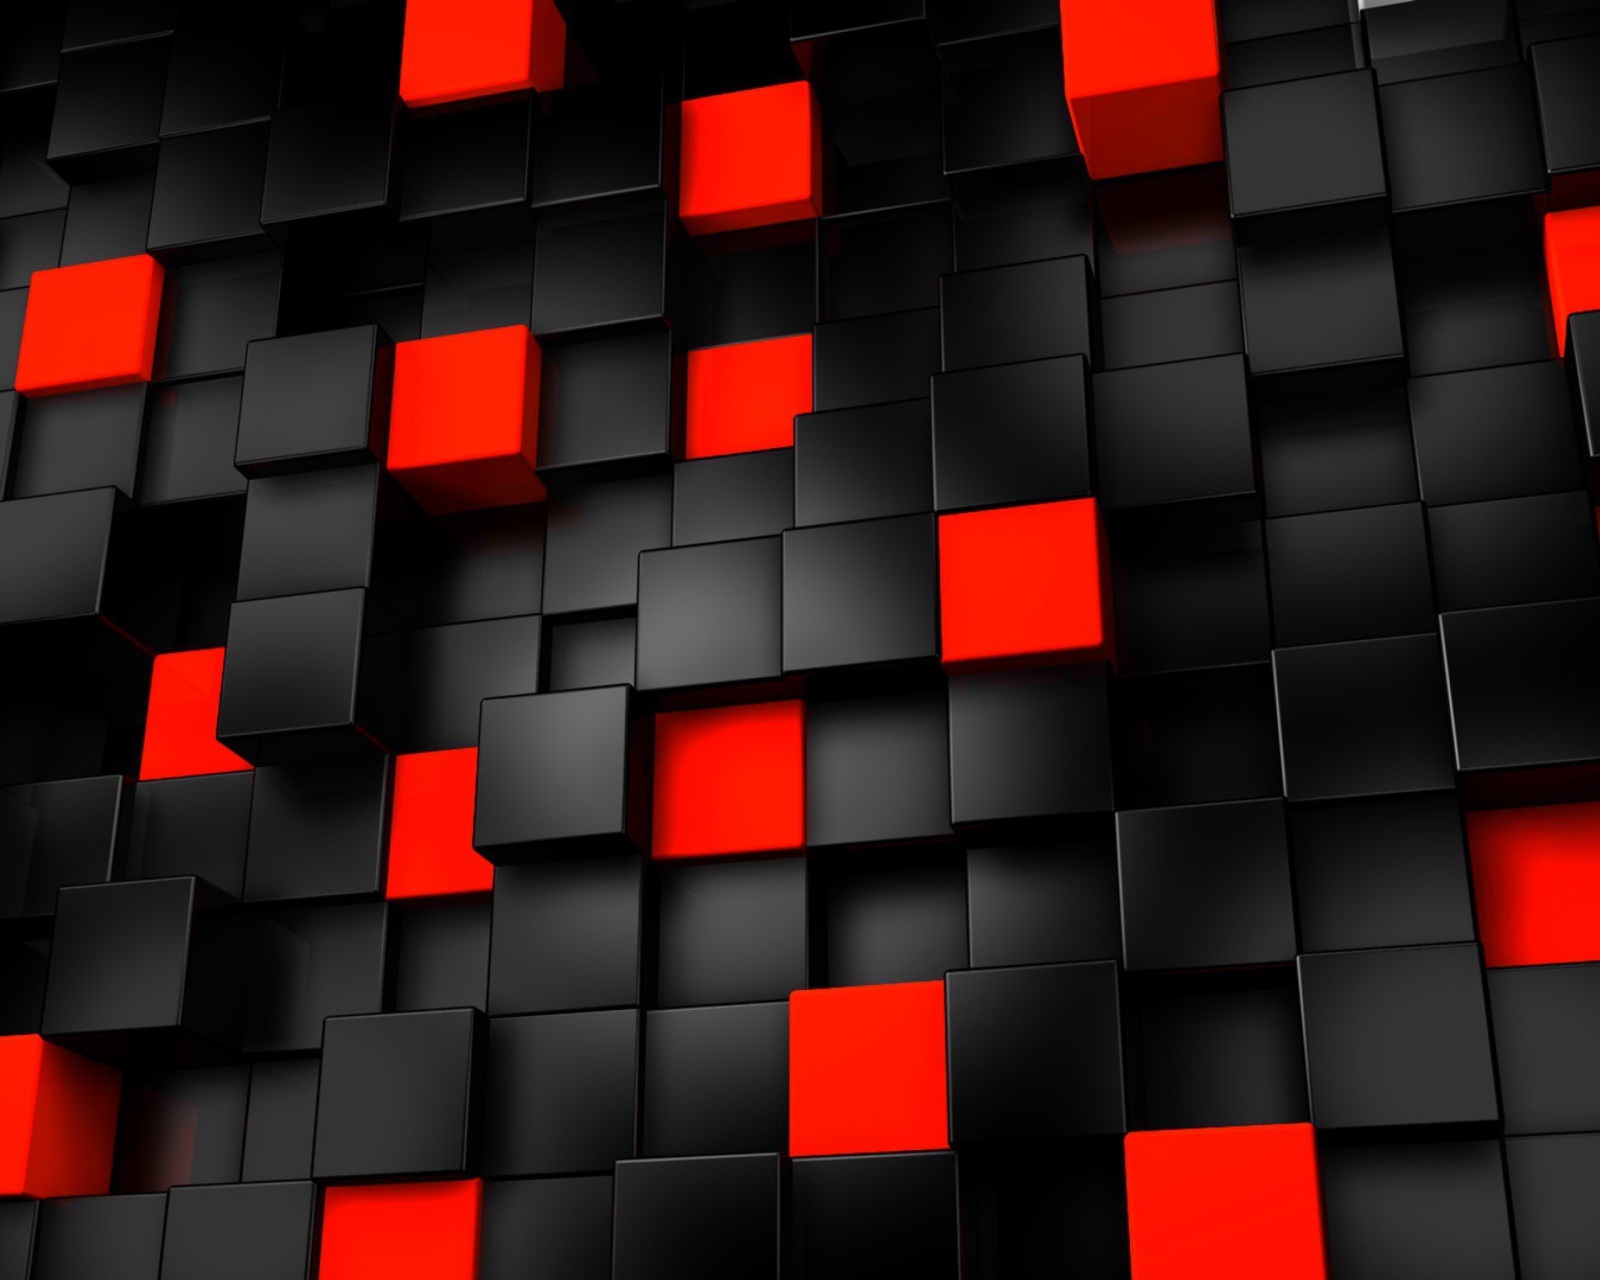 Abstract Black And Red Cubes Wallpaper1600x1280 Wallpaper